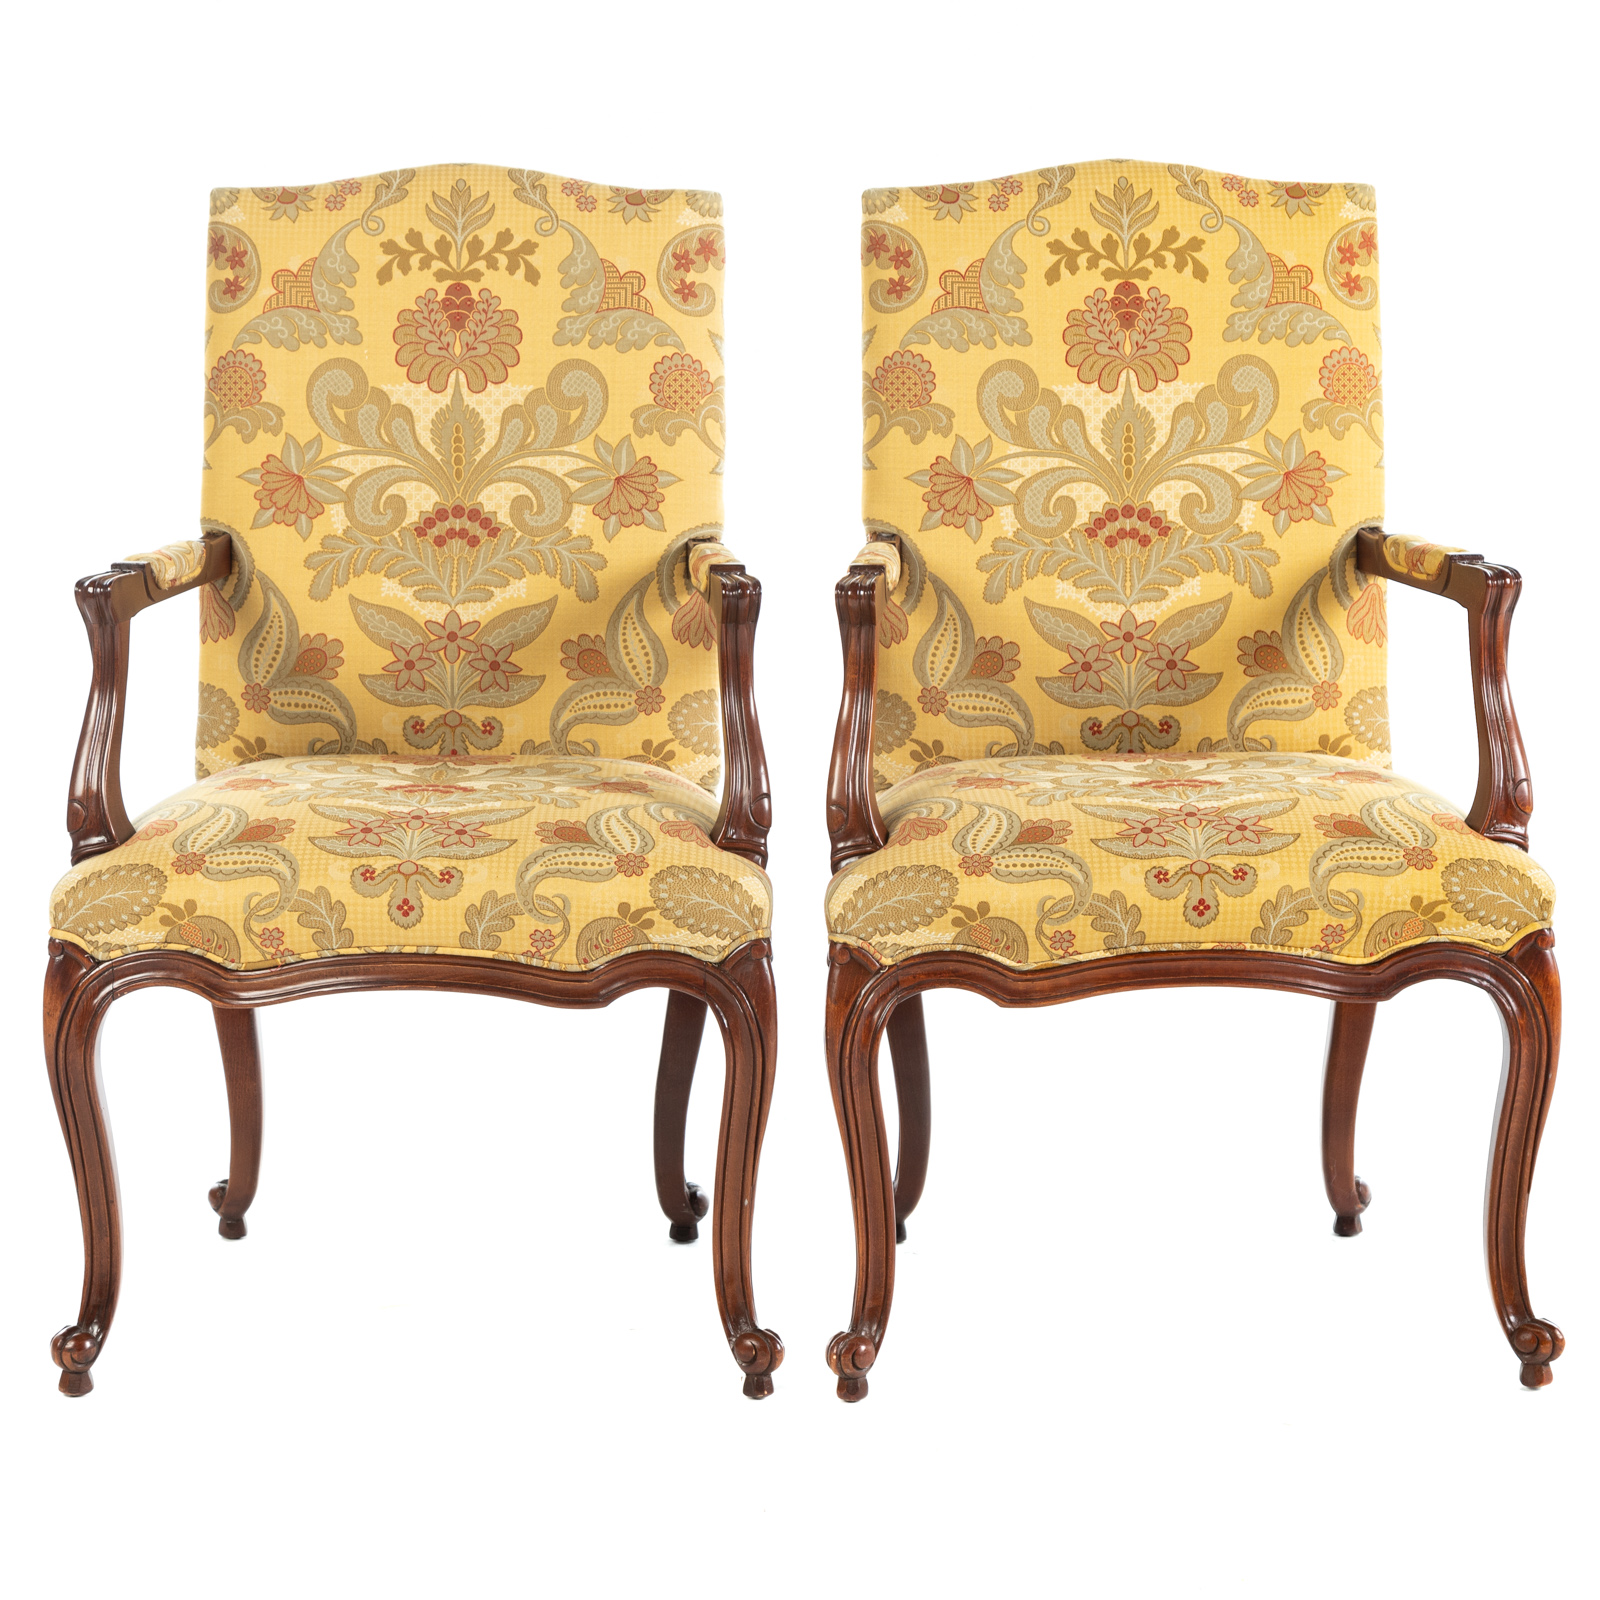 A PAIR OF HICKORY CHAIR LOUIS XV 36a9a8